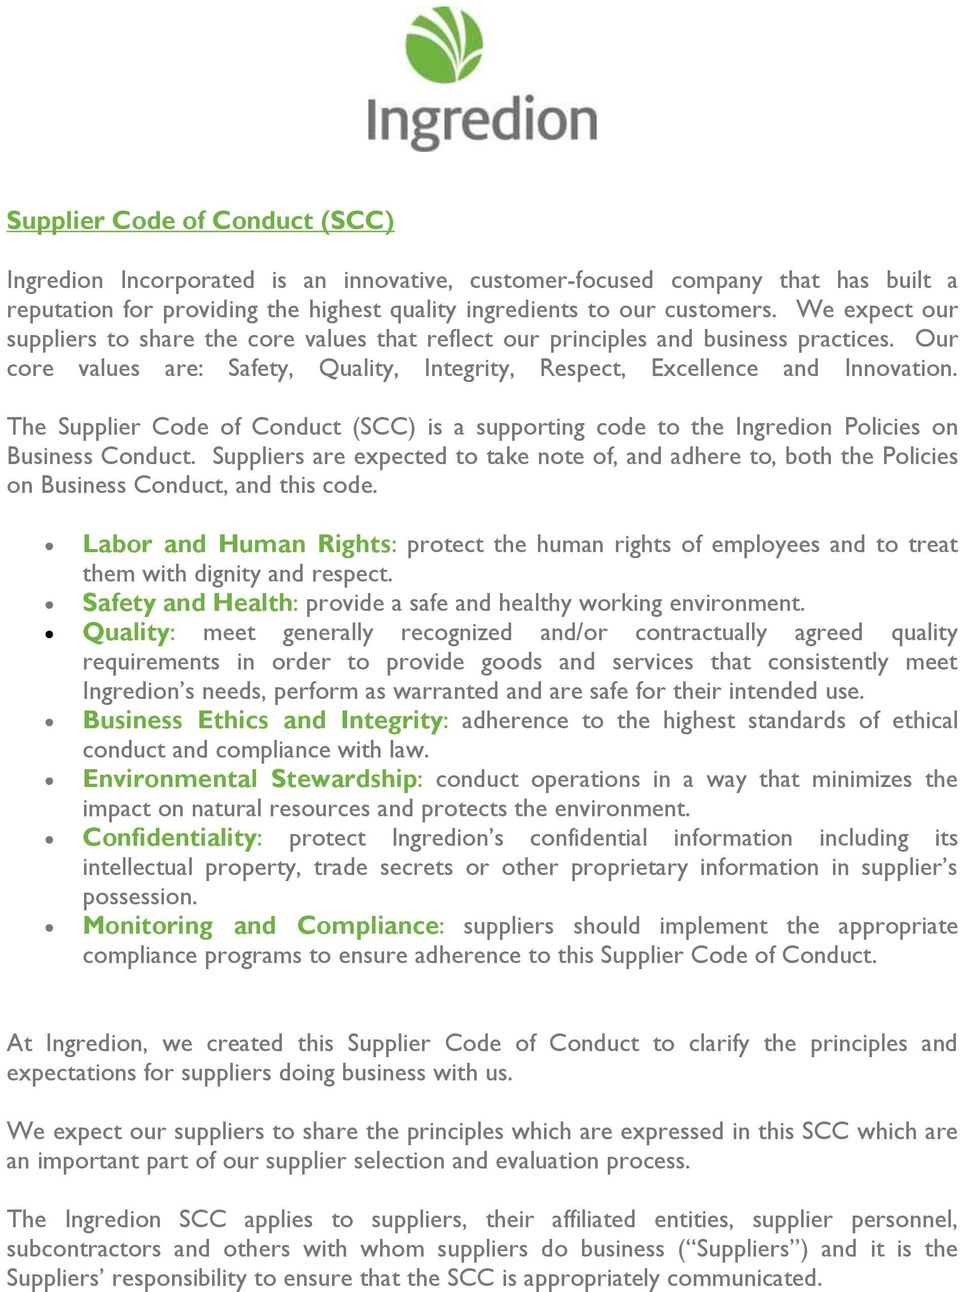 The Supplier Code of Conduct (SCC) is a supporting code to the Ingredion Policies on Business Conduct.